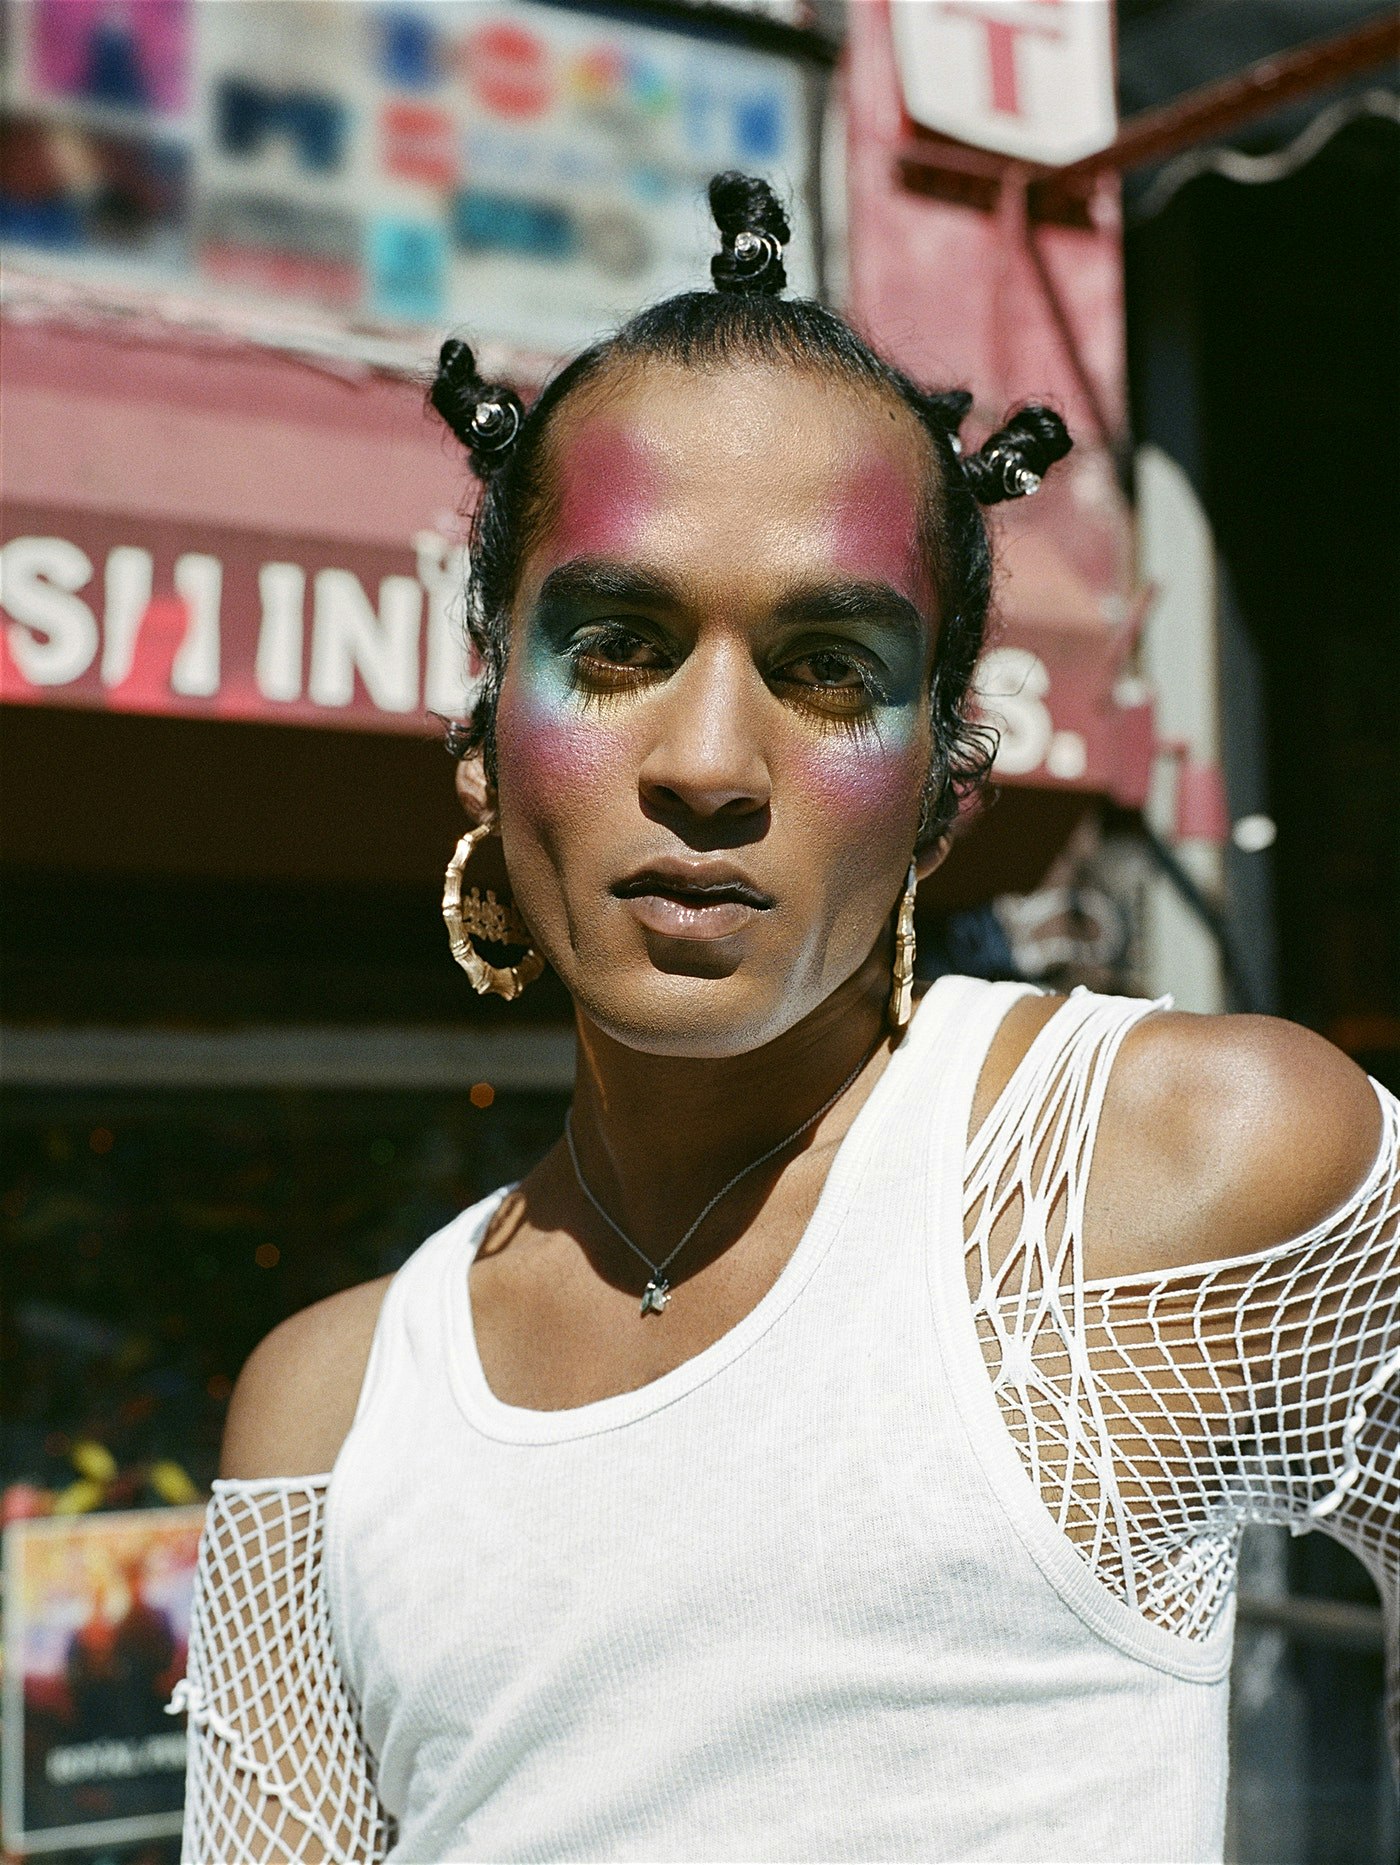 A Black male wearing make up, large hoop earrings and an off-the-shoulder white top